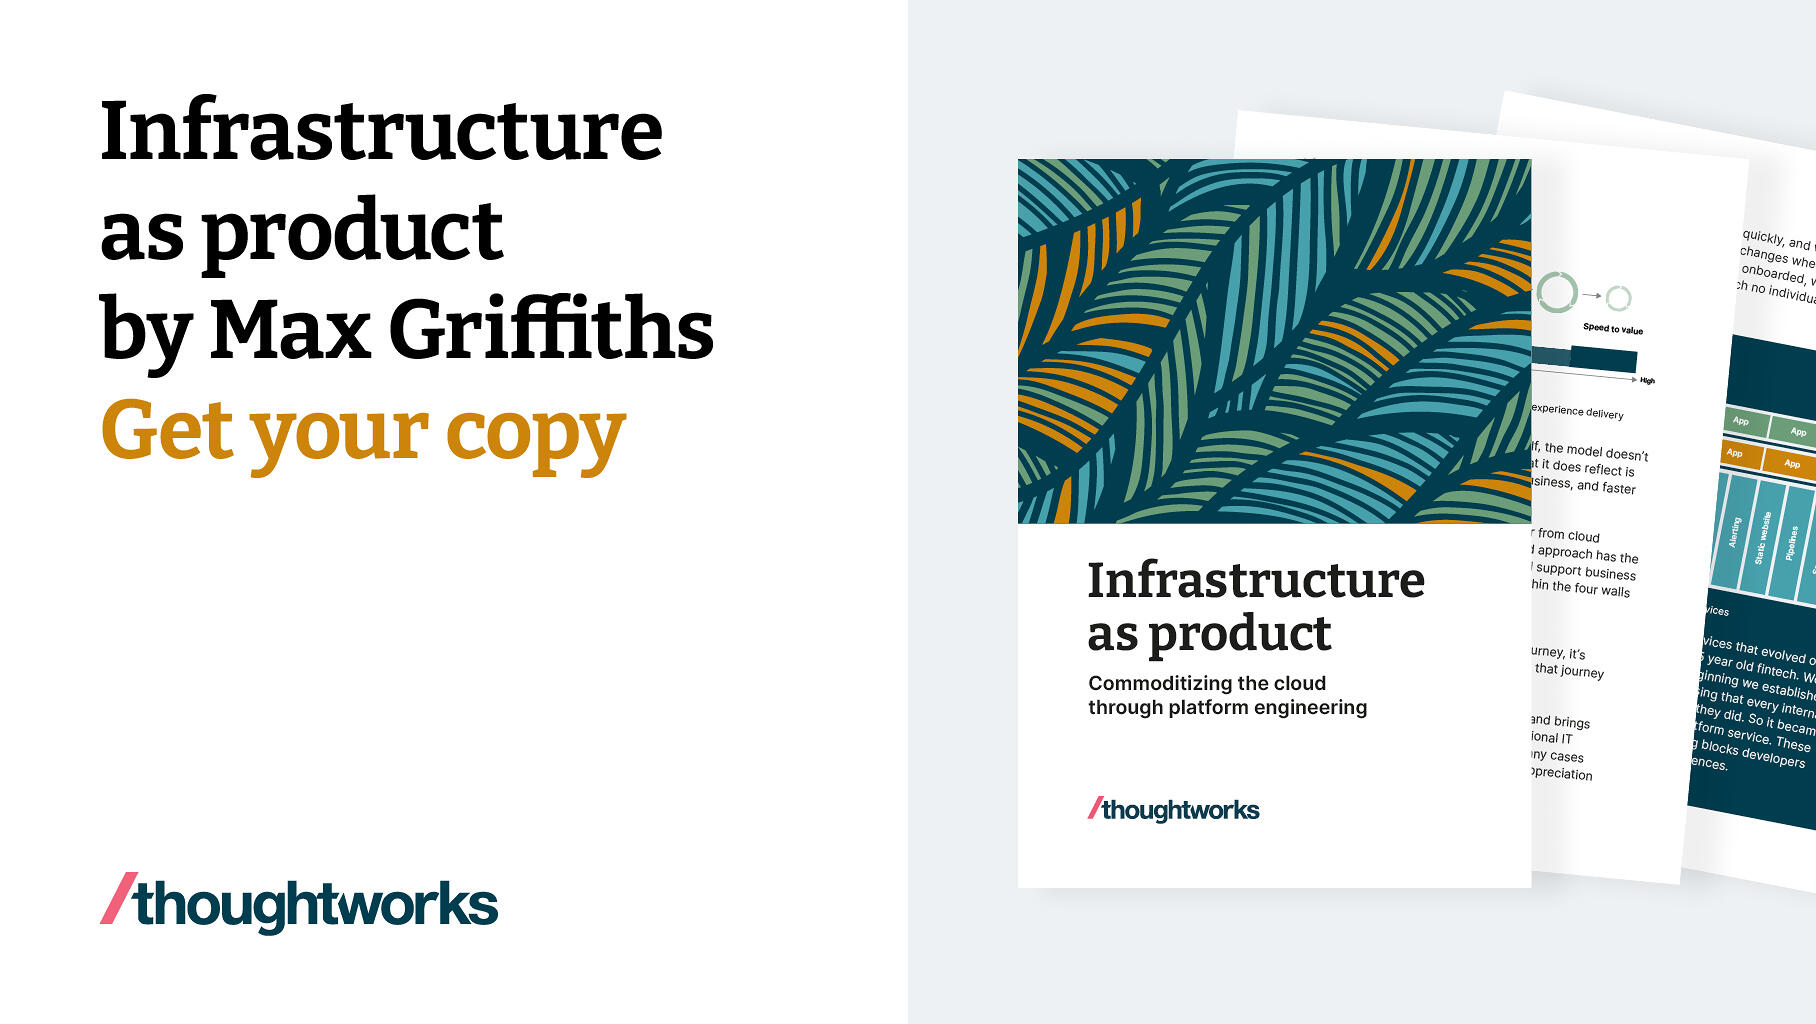 Infrastructure as product